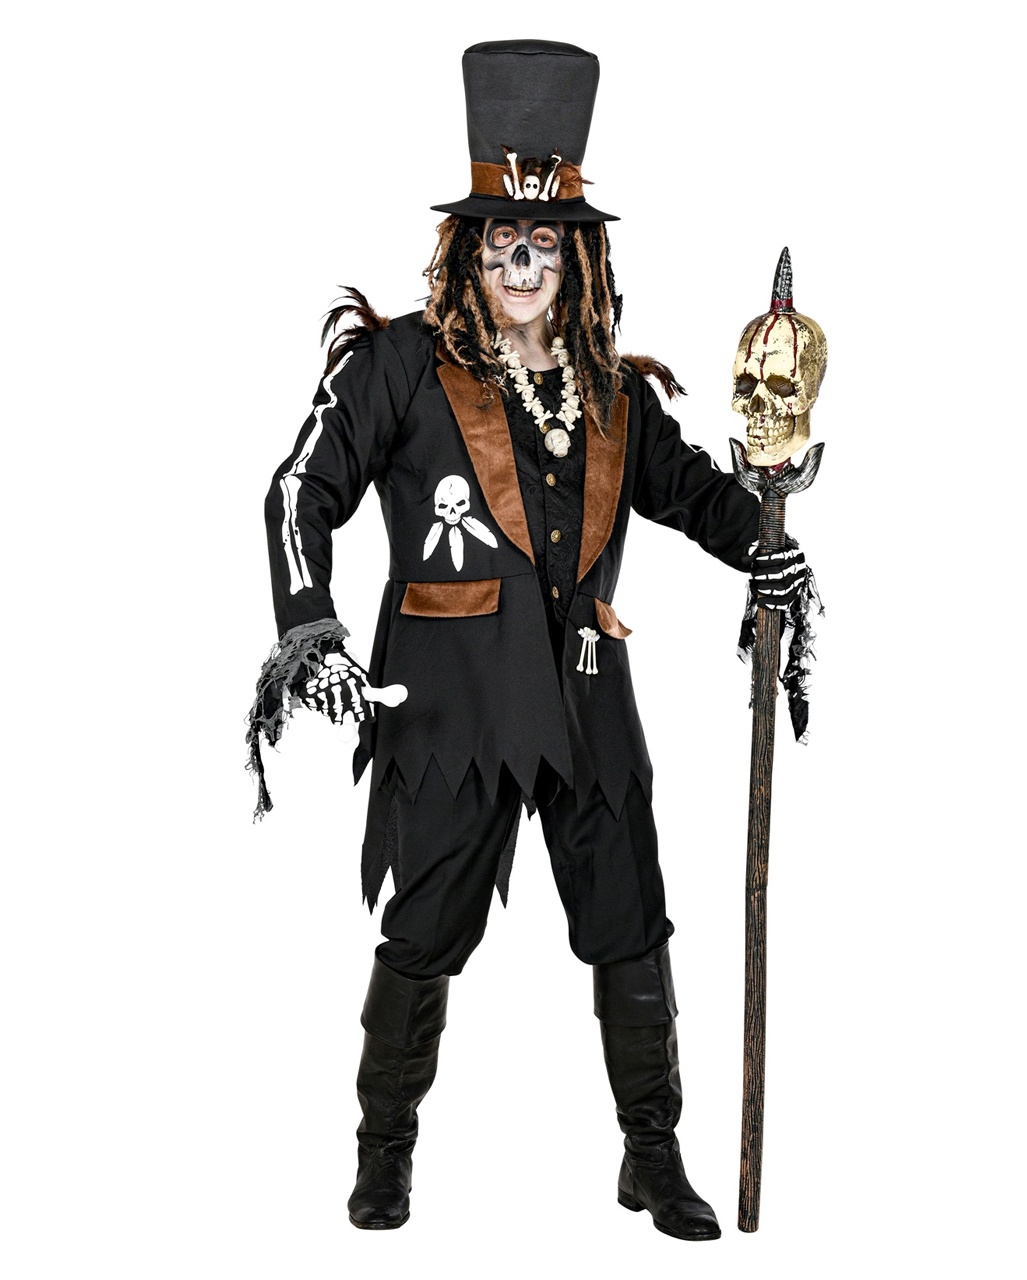 Voodoo Skull Halloween Latex Witch Doctor Mask With Hat Costume Fancy Dress 